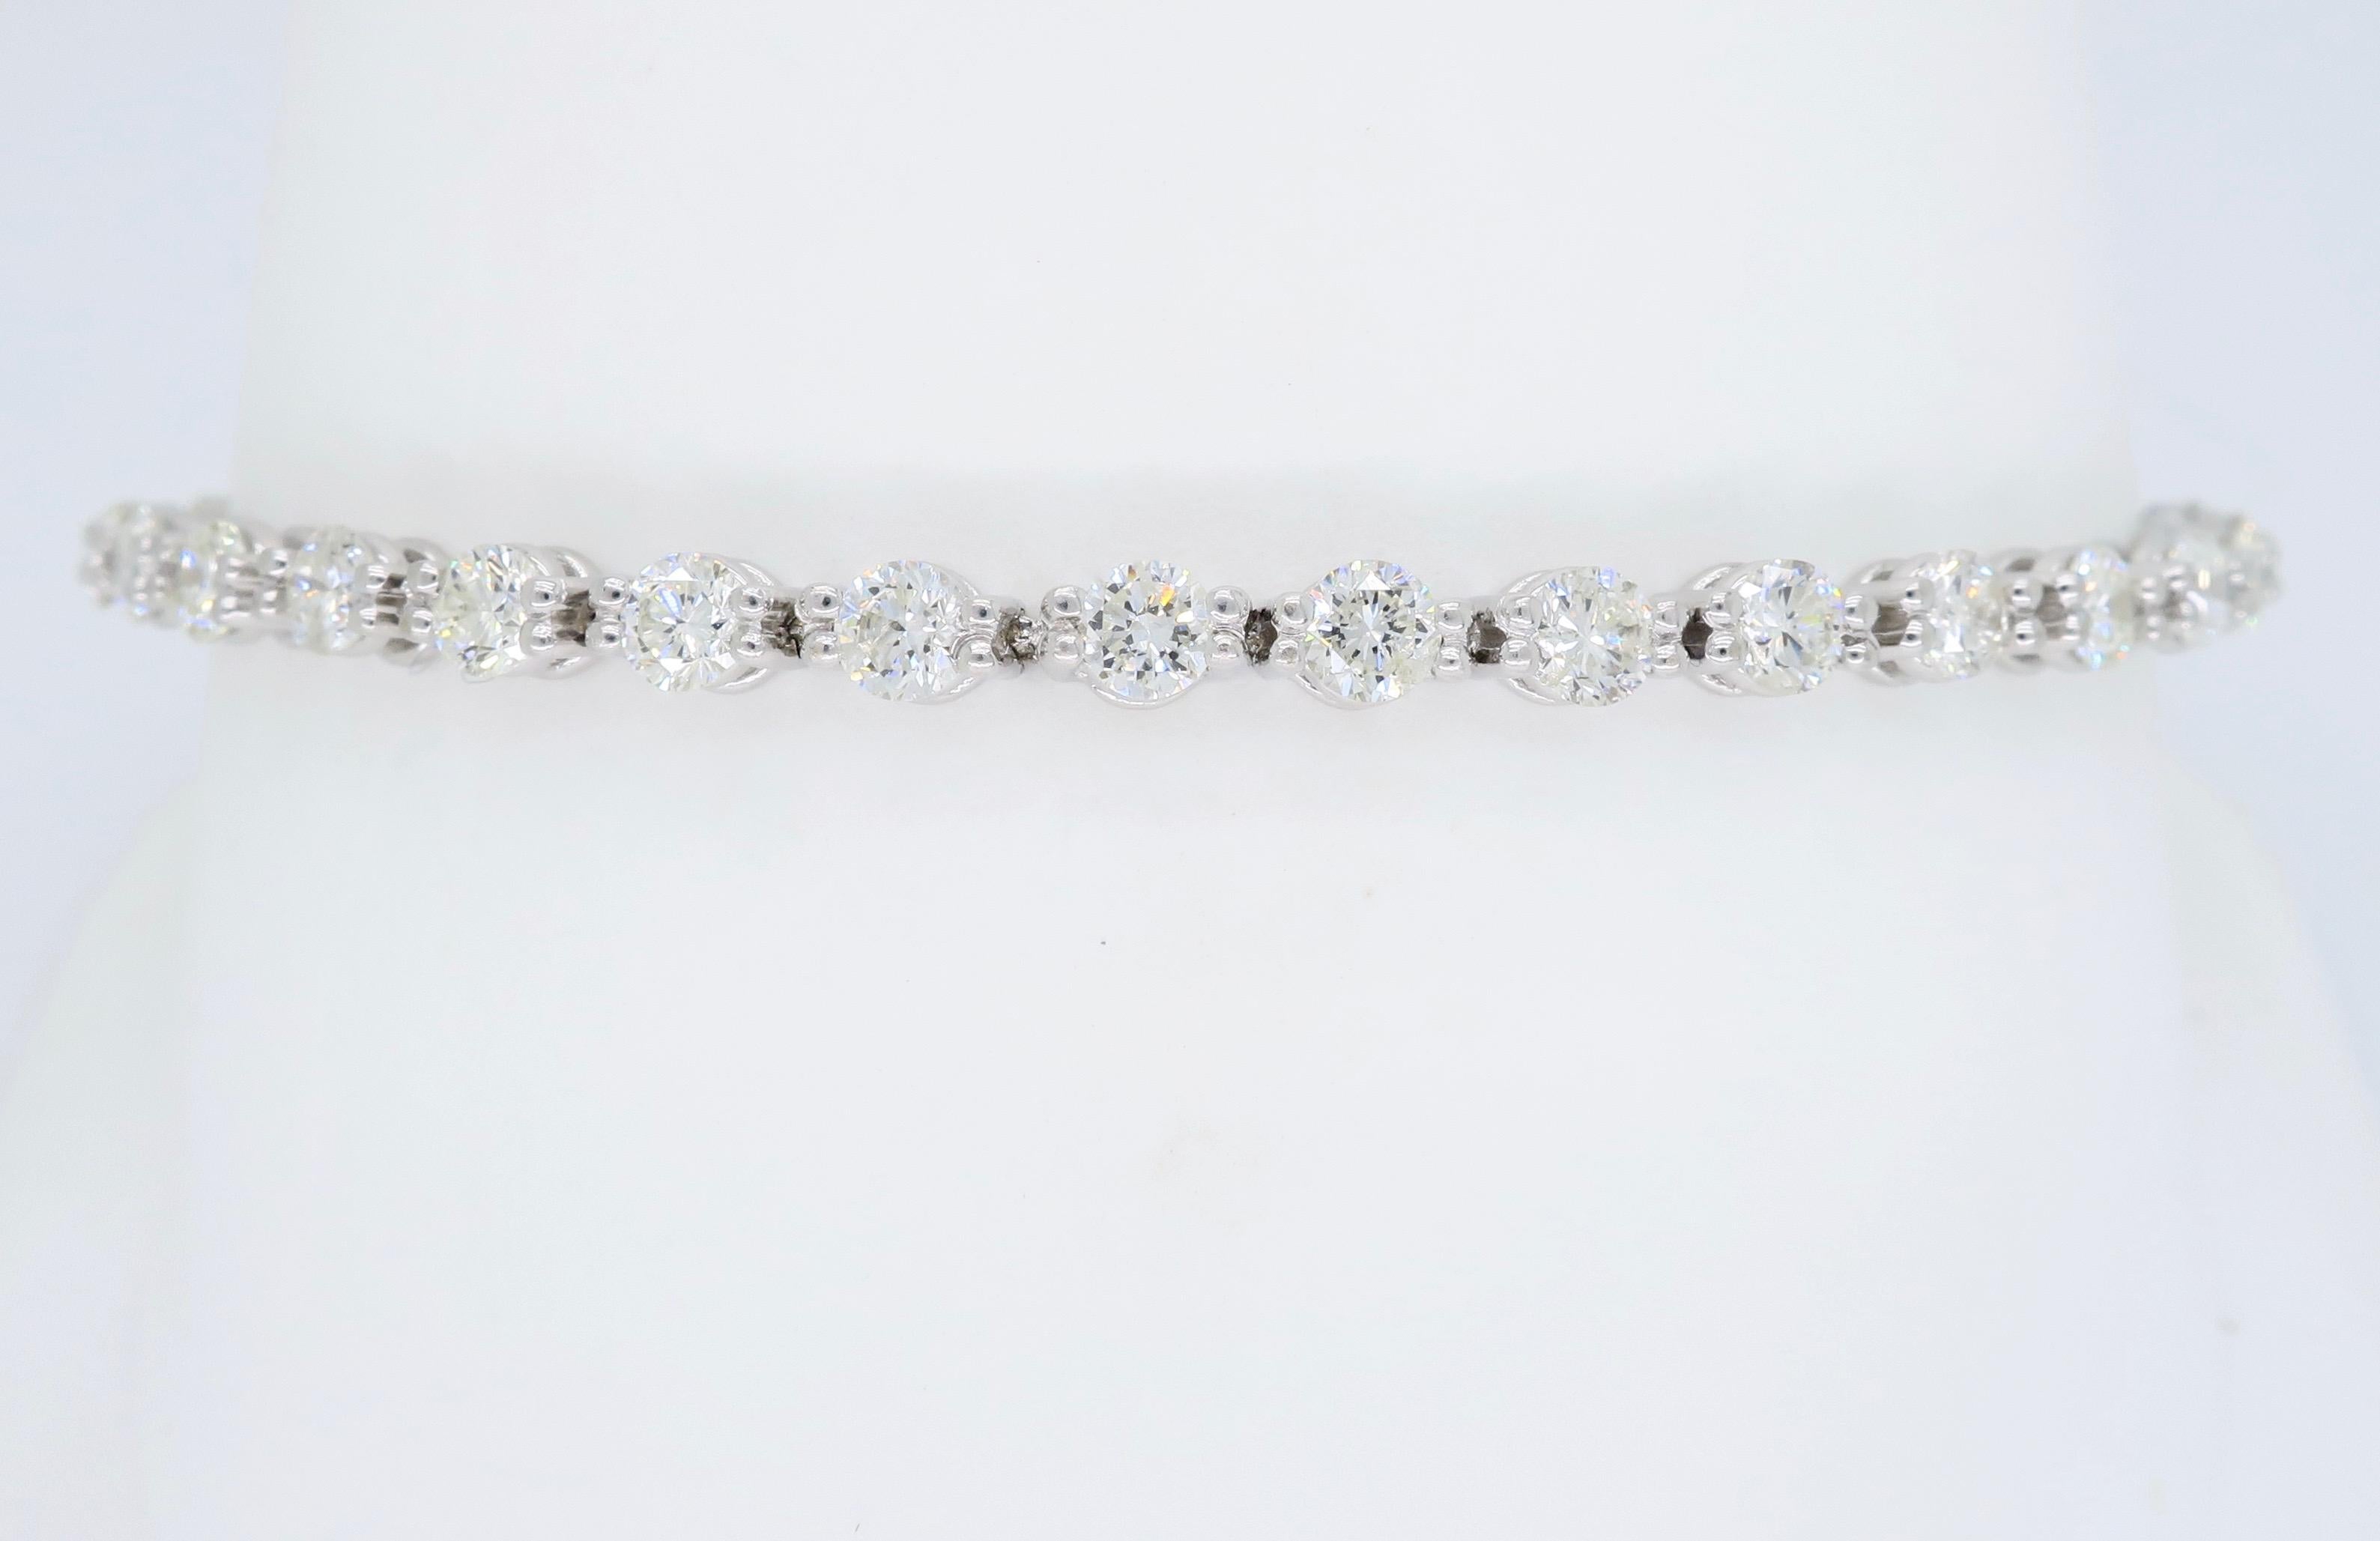 Stunning bracelet features 34 Round Brilliant Cut Diamonds with an average color of F-G and an average clarity of VS with a few SI diamonds. There is approximately 4.25CTW of diamonds in this beautiful bracelet. The 18K white gold bracelet is 7” in